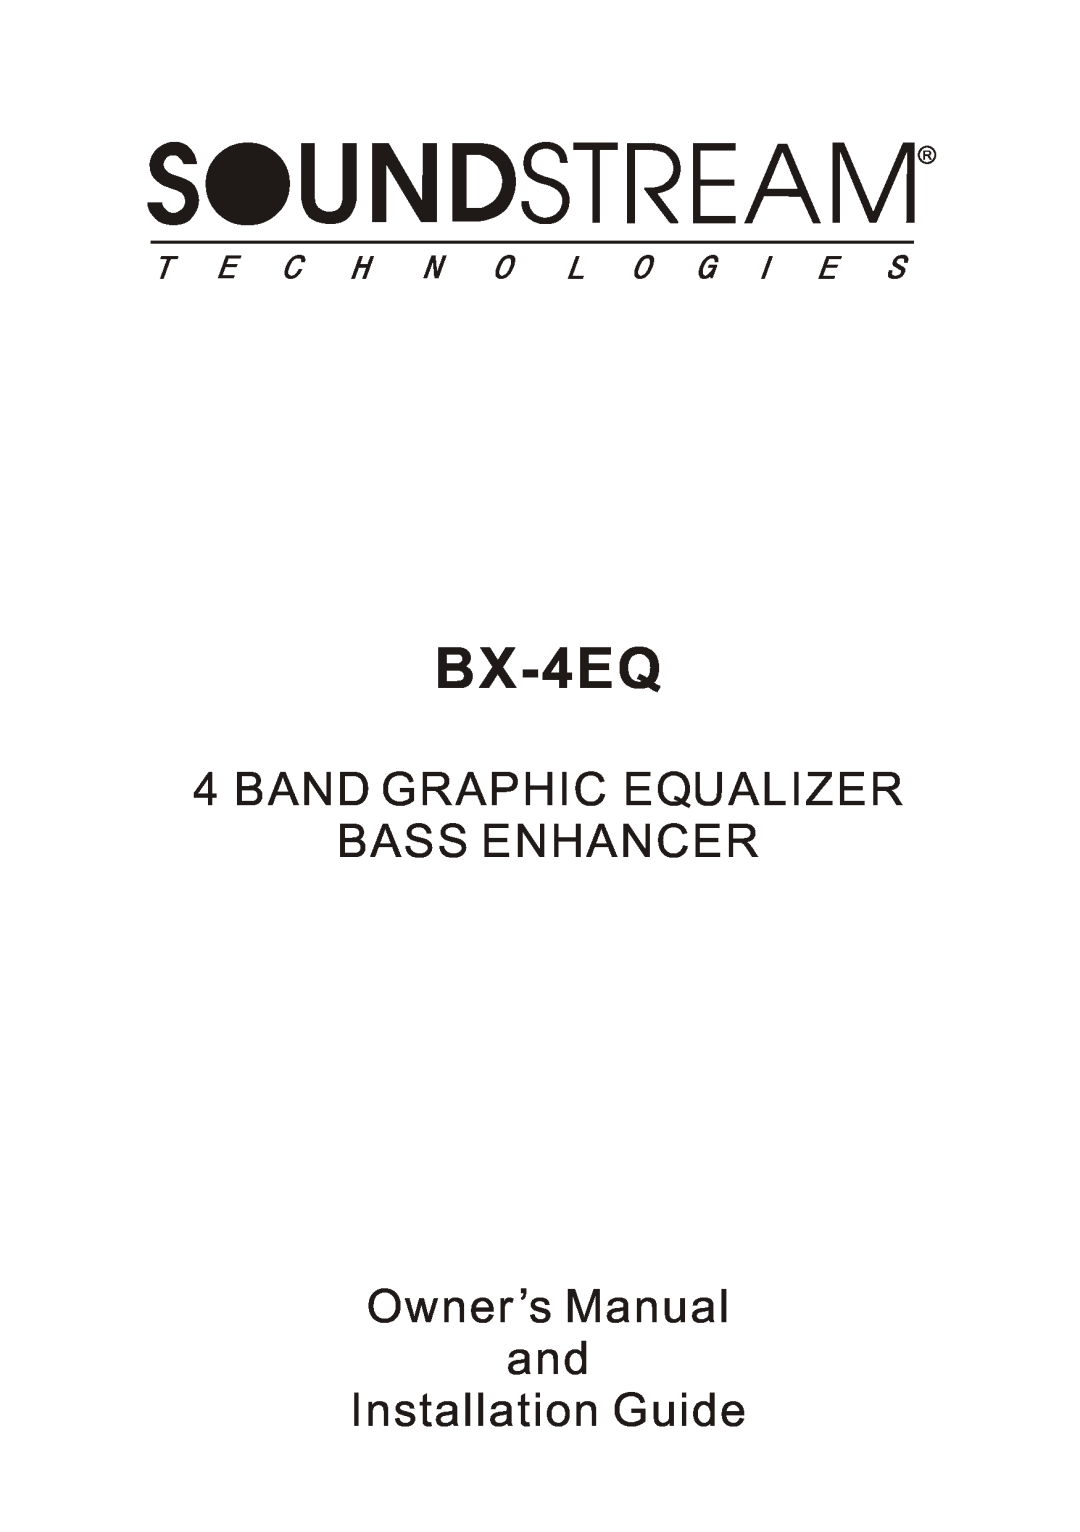 Soundstream Technologies BX-4EQ owner manual Band Graphic Equalizer Bass Enhancer, Owner s Manual and Installation Guide 